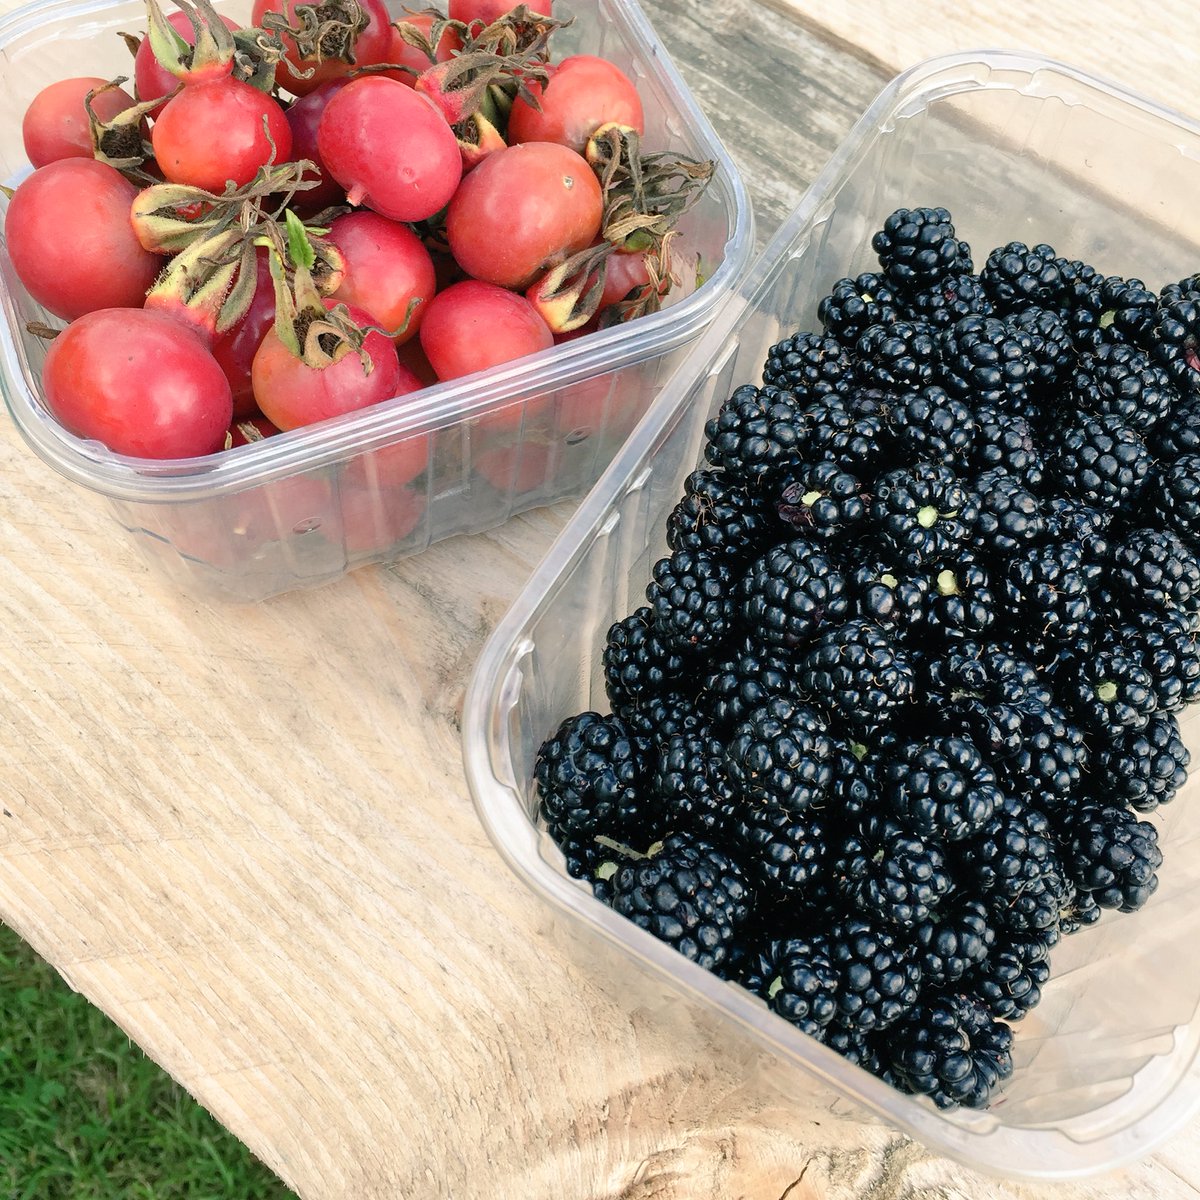 Blackberry haul, destined for whisky! #foraging #wildbooze #Cornwall